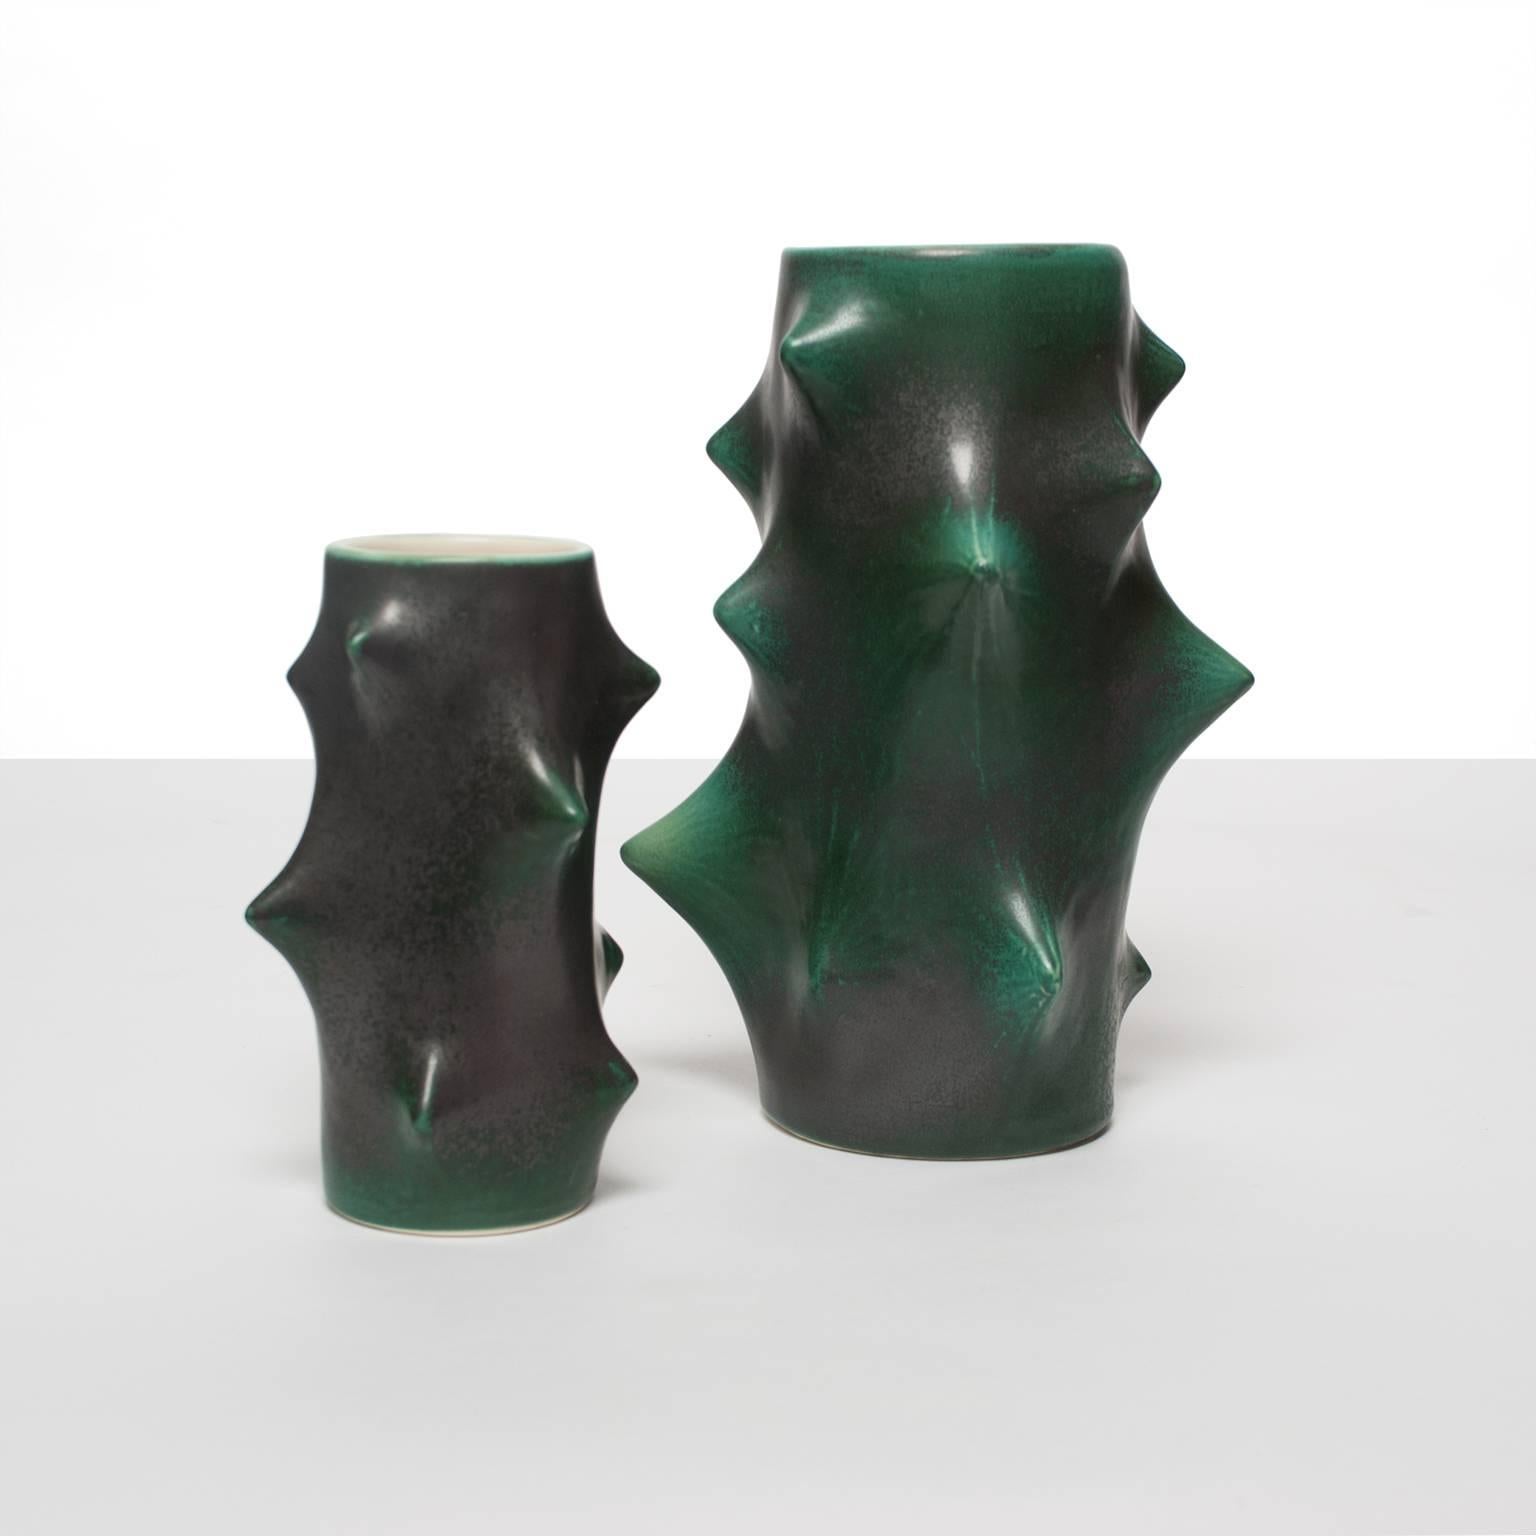 One large and one smaller Scandinavian Modern ceramic vases by Knud Basse for Michael Andersen & Sons. These 